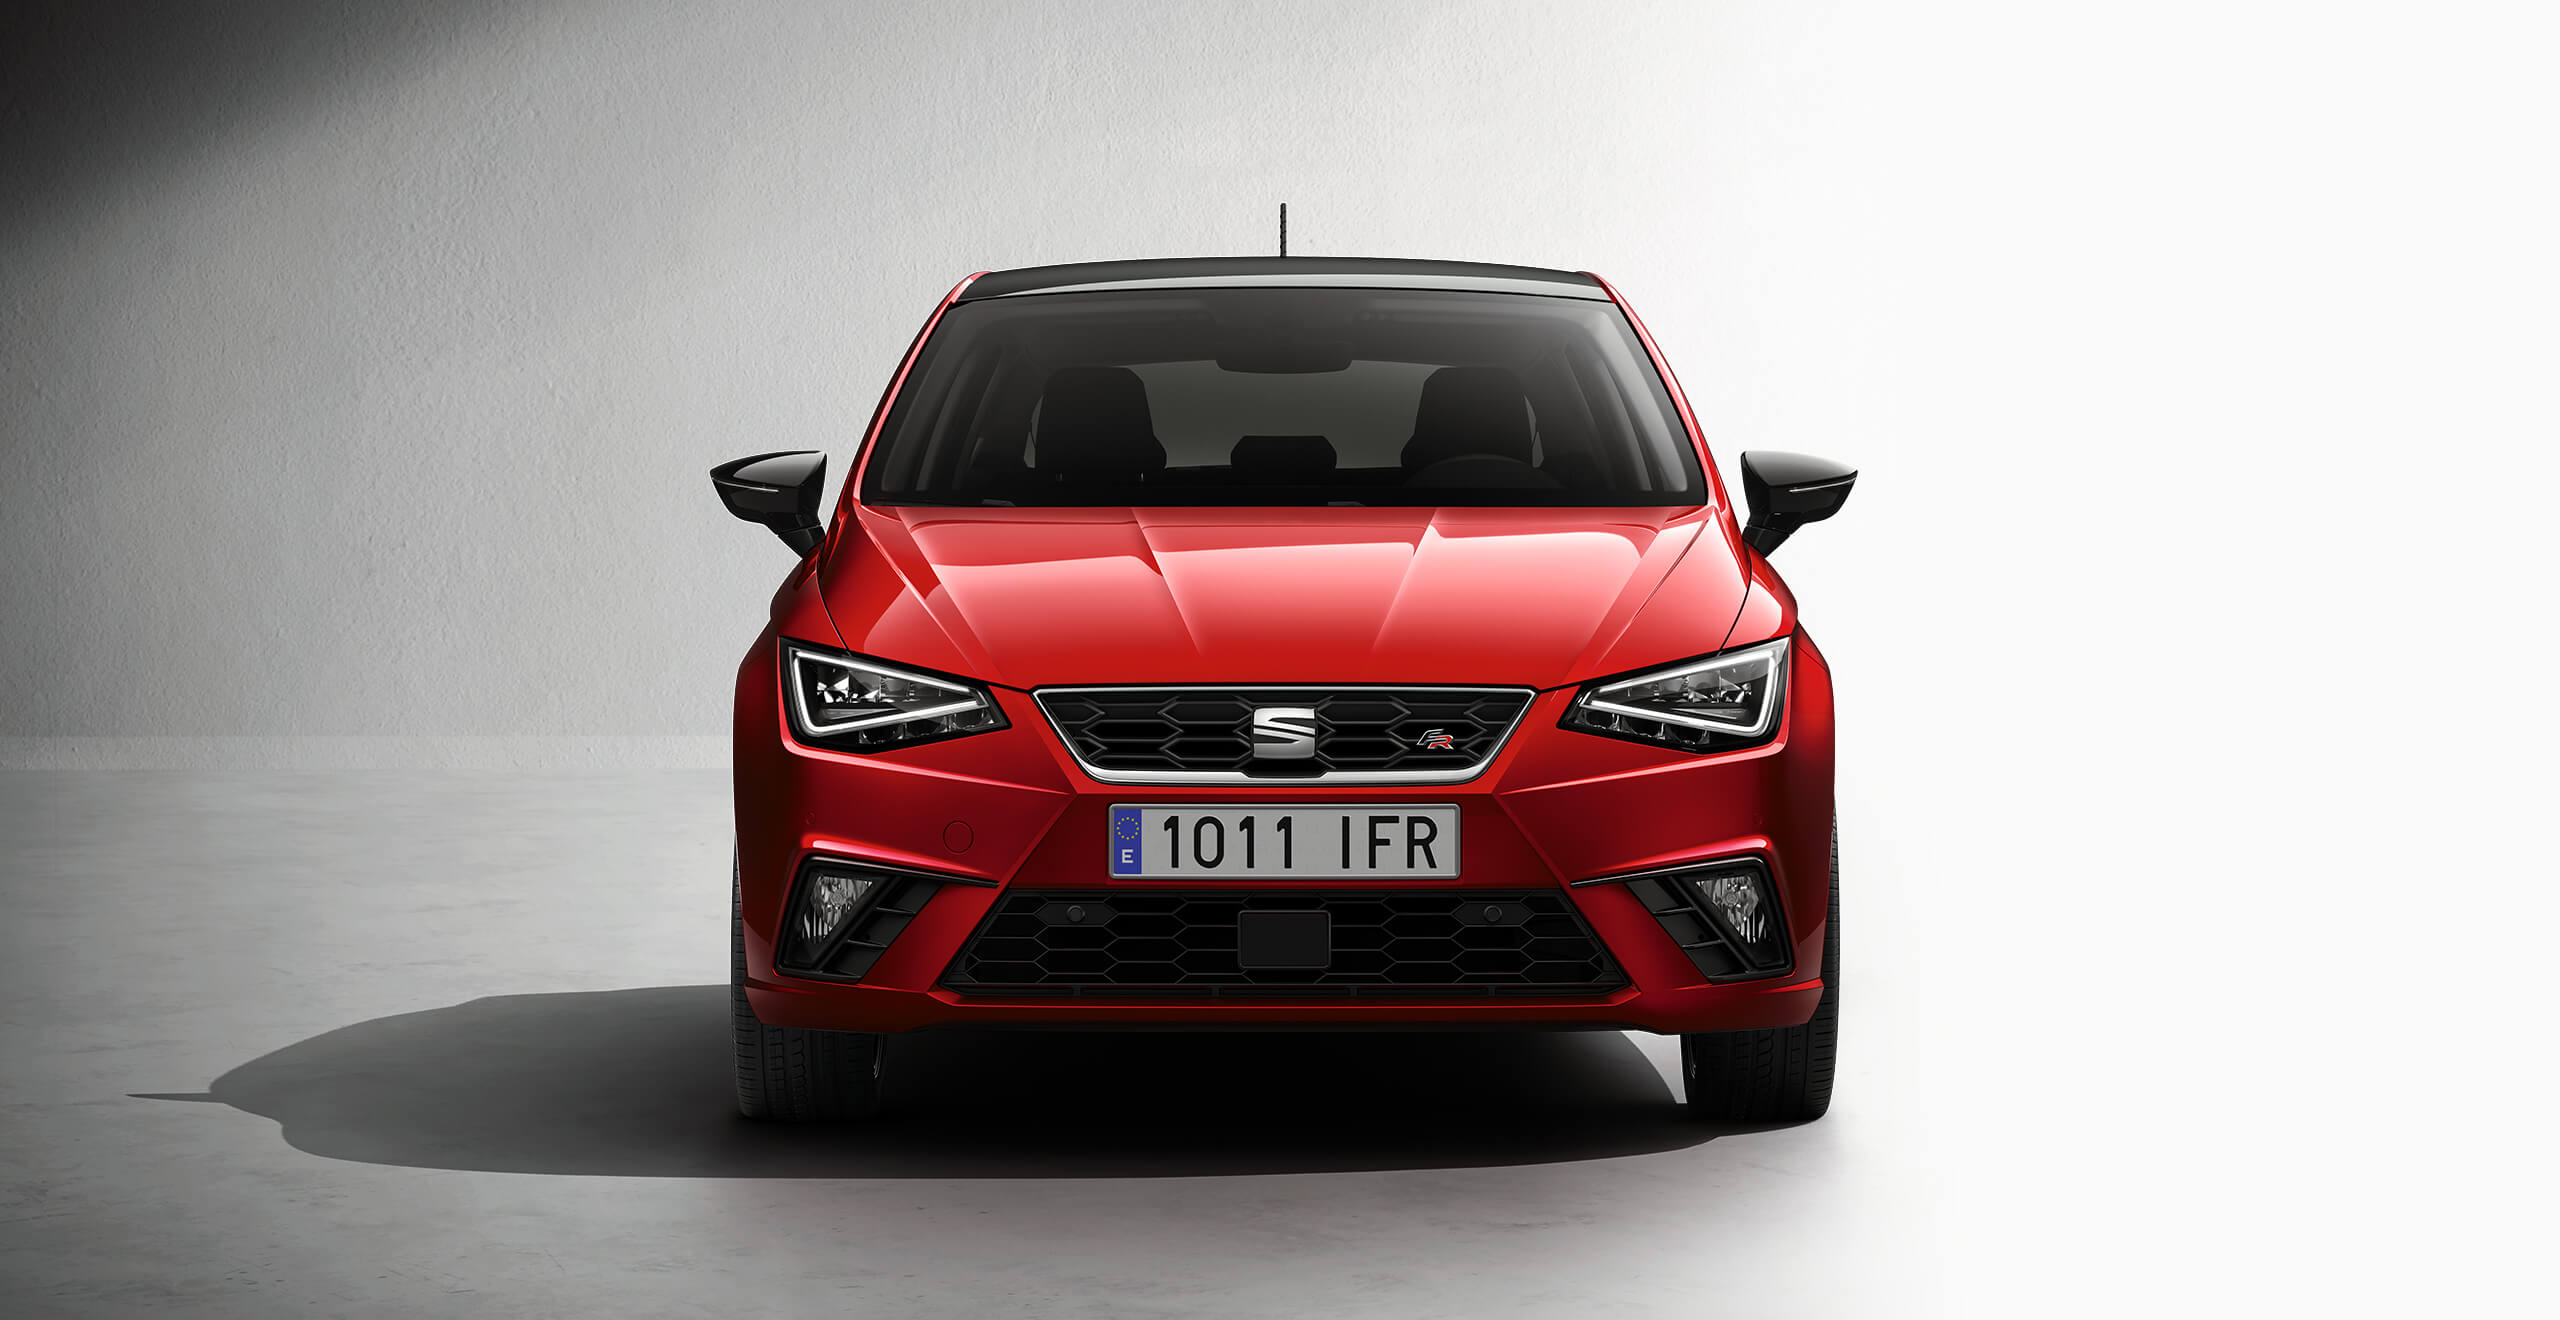 Front view of the new SEAT Ibiza in red colour